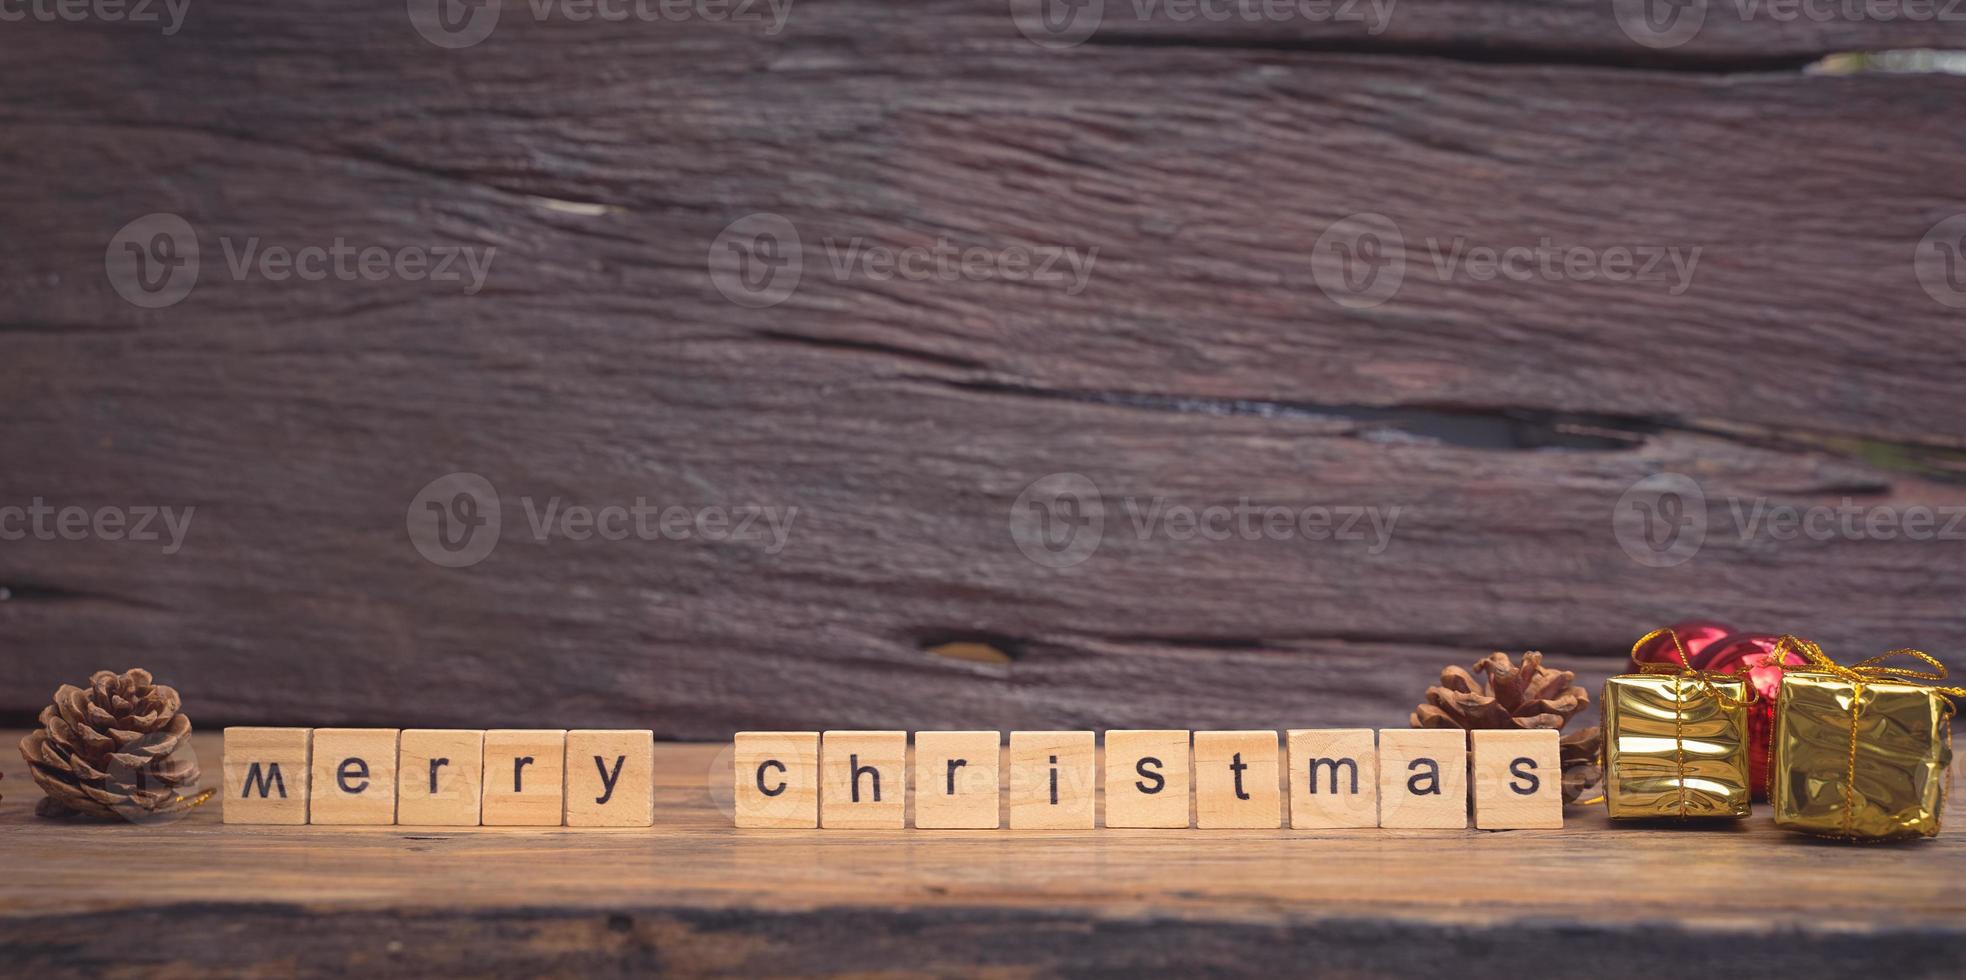 Merry Christmas. Christmas greeting card with rustic wood and ornaments. photo